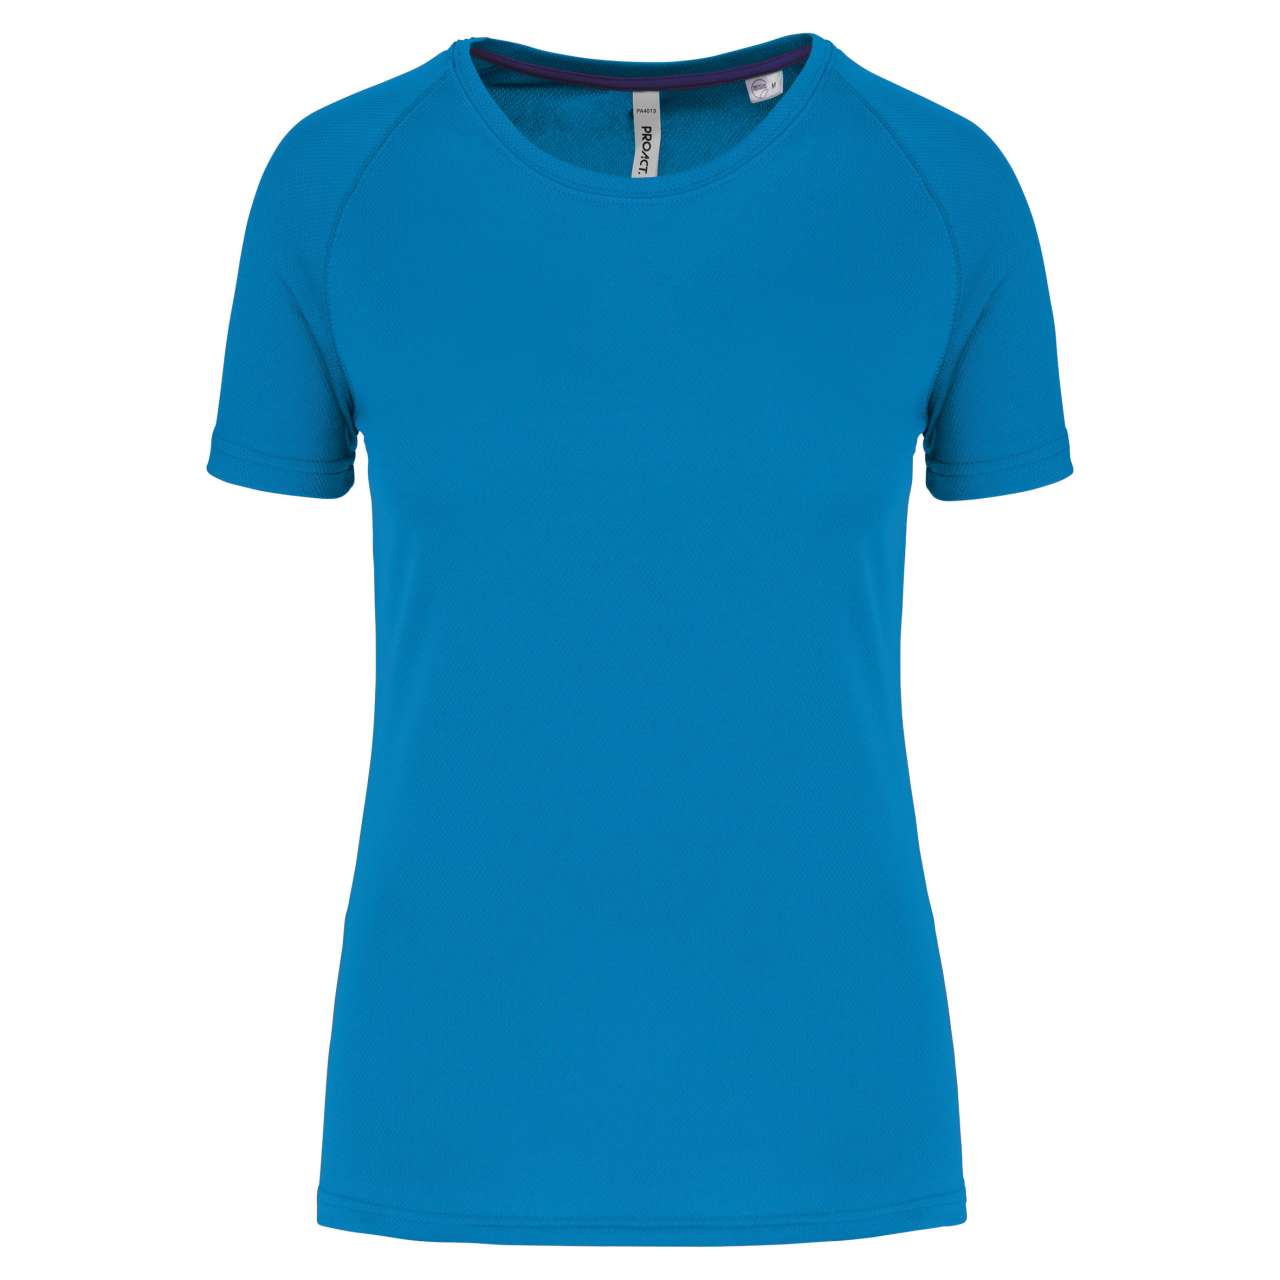 Promo  LADIES' RECYCLED ROUND NECK SPORTS T-SHIRT